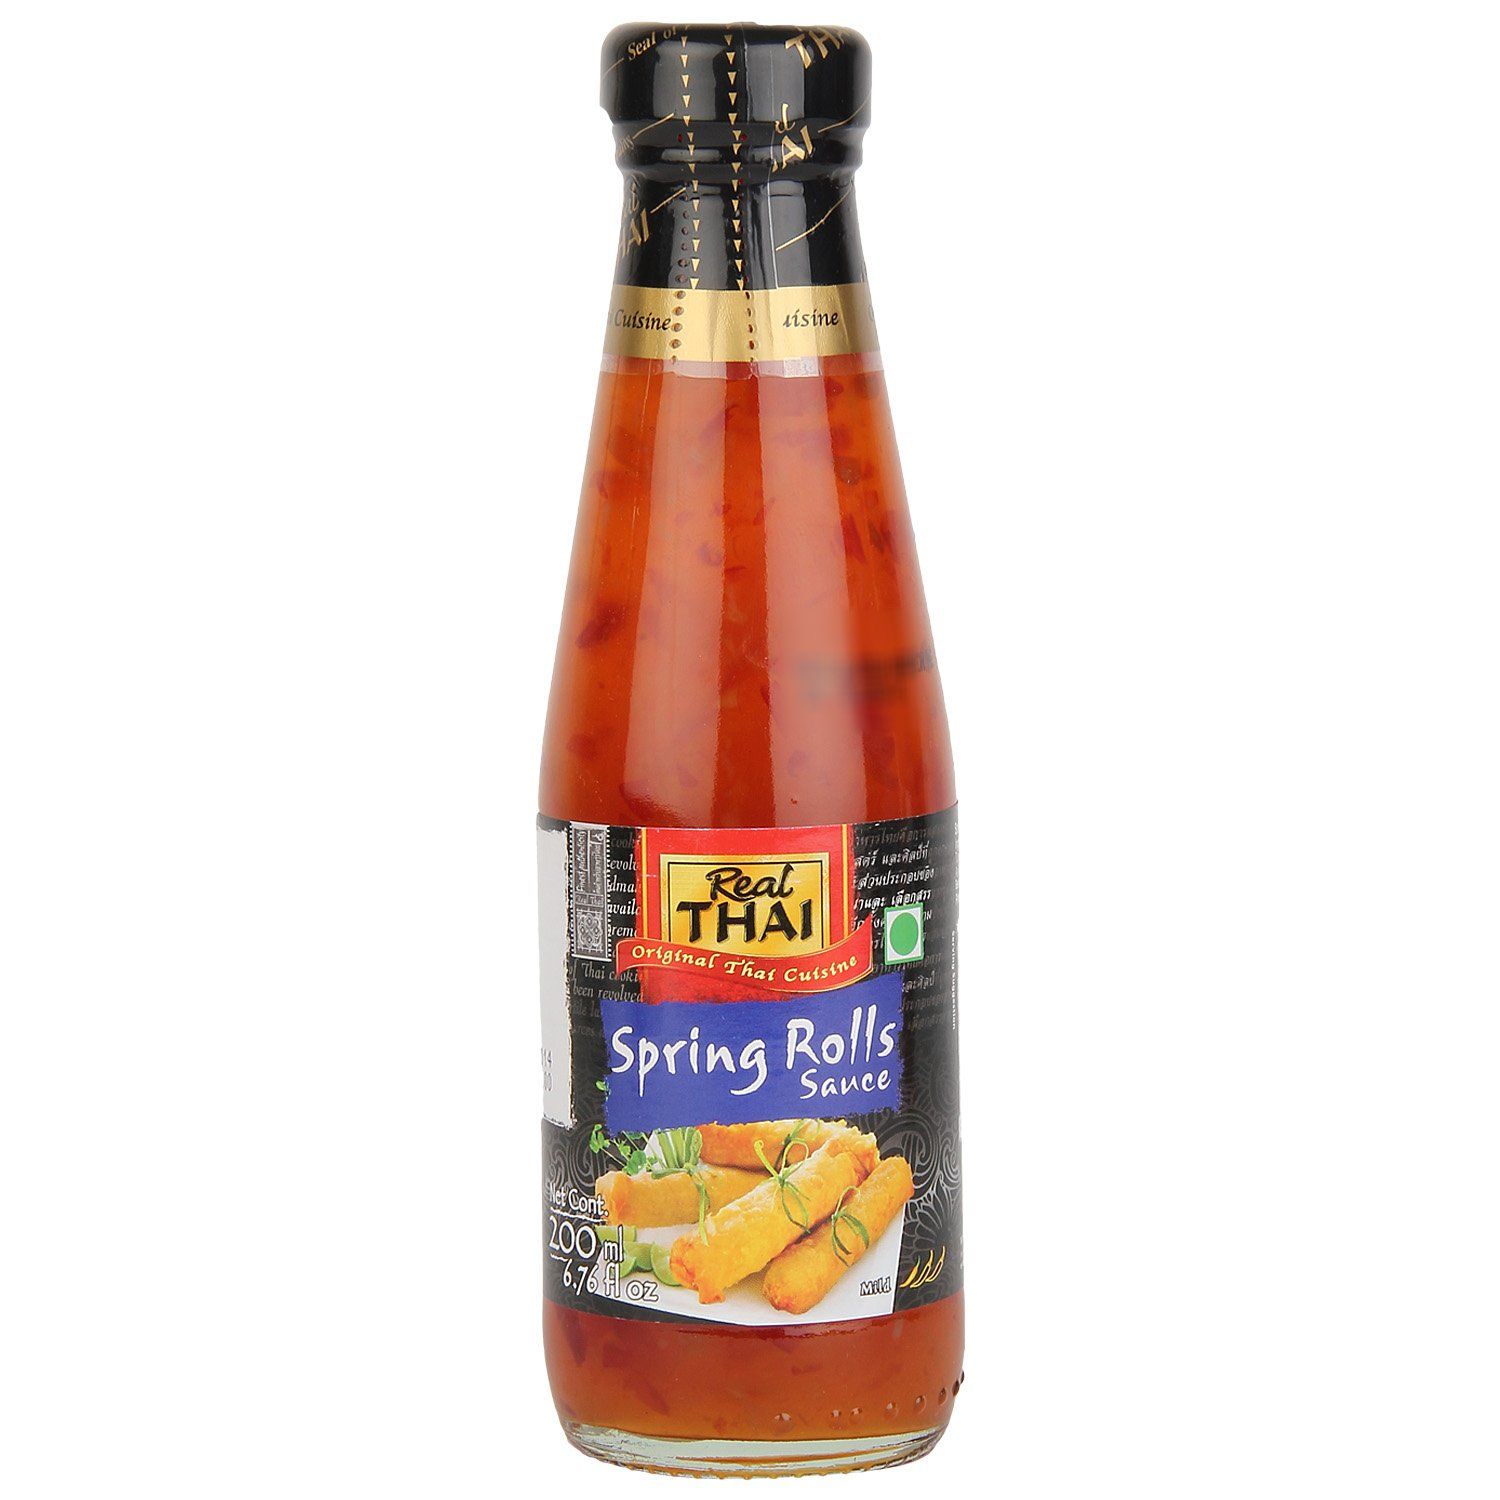 Real Thai Spring Roll Sauce Image